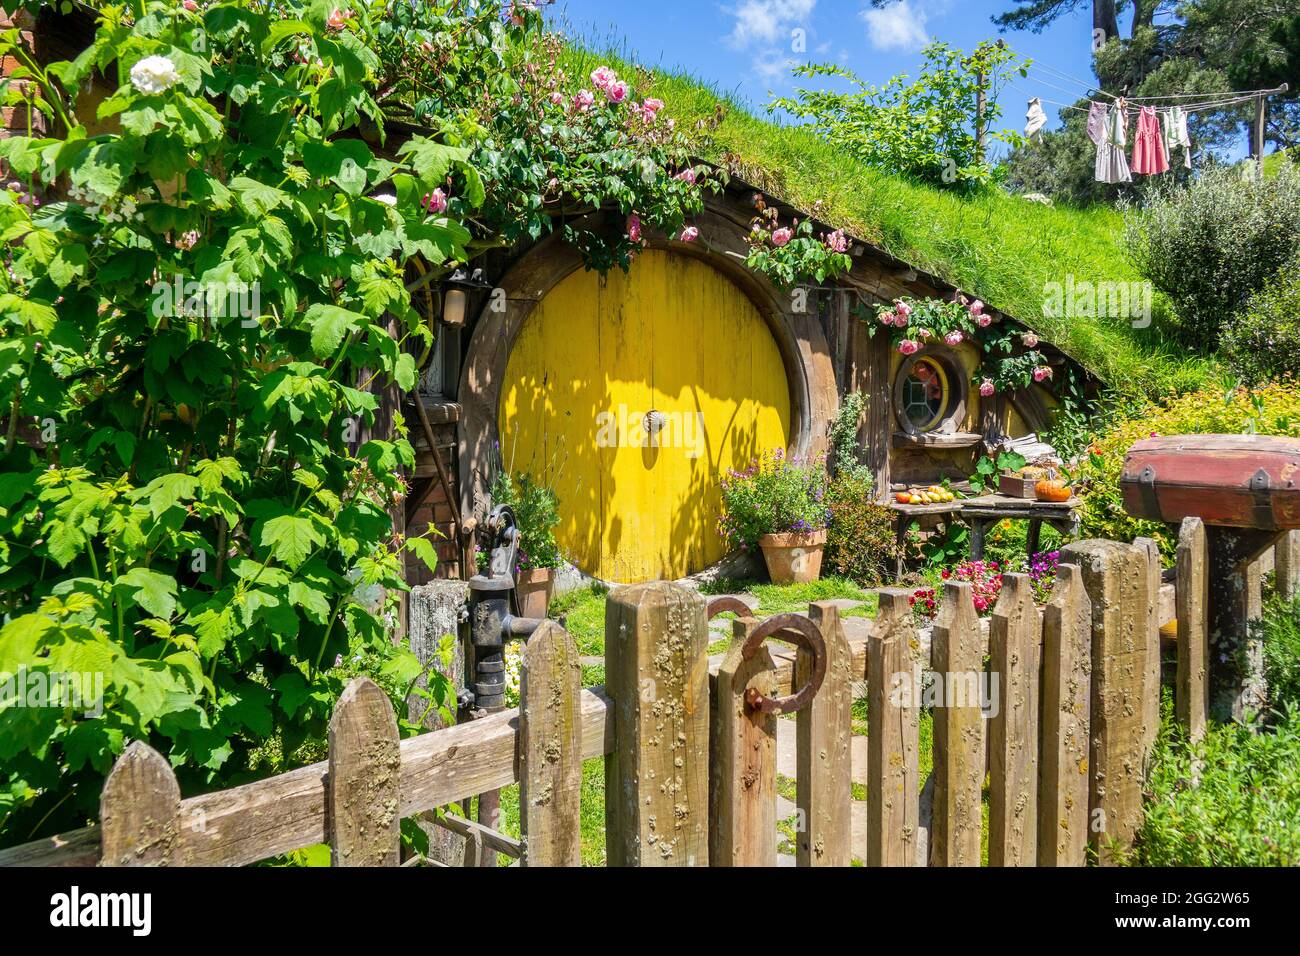 Yellow Door Hobbit Hole Home On The Hobbiton Movie Set For The Lord Of The Rings Movie Trilogy In Matamata New Zealand A Popular Tourist Attraction Stock Photo